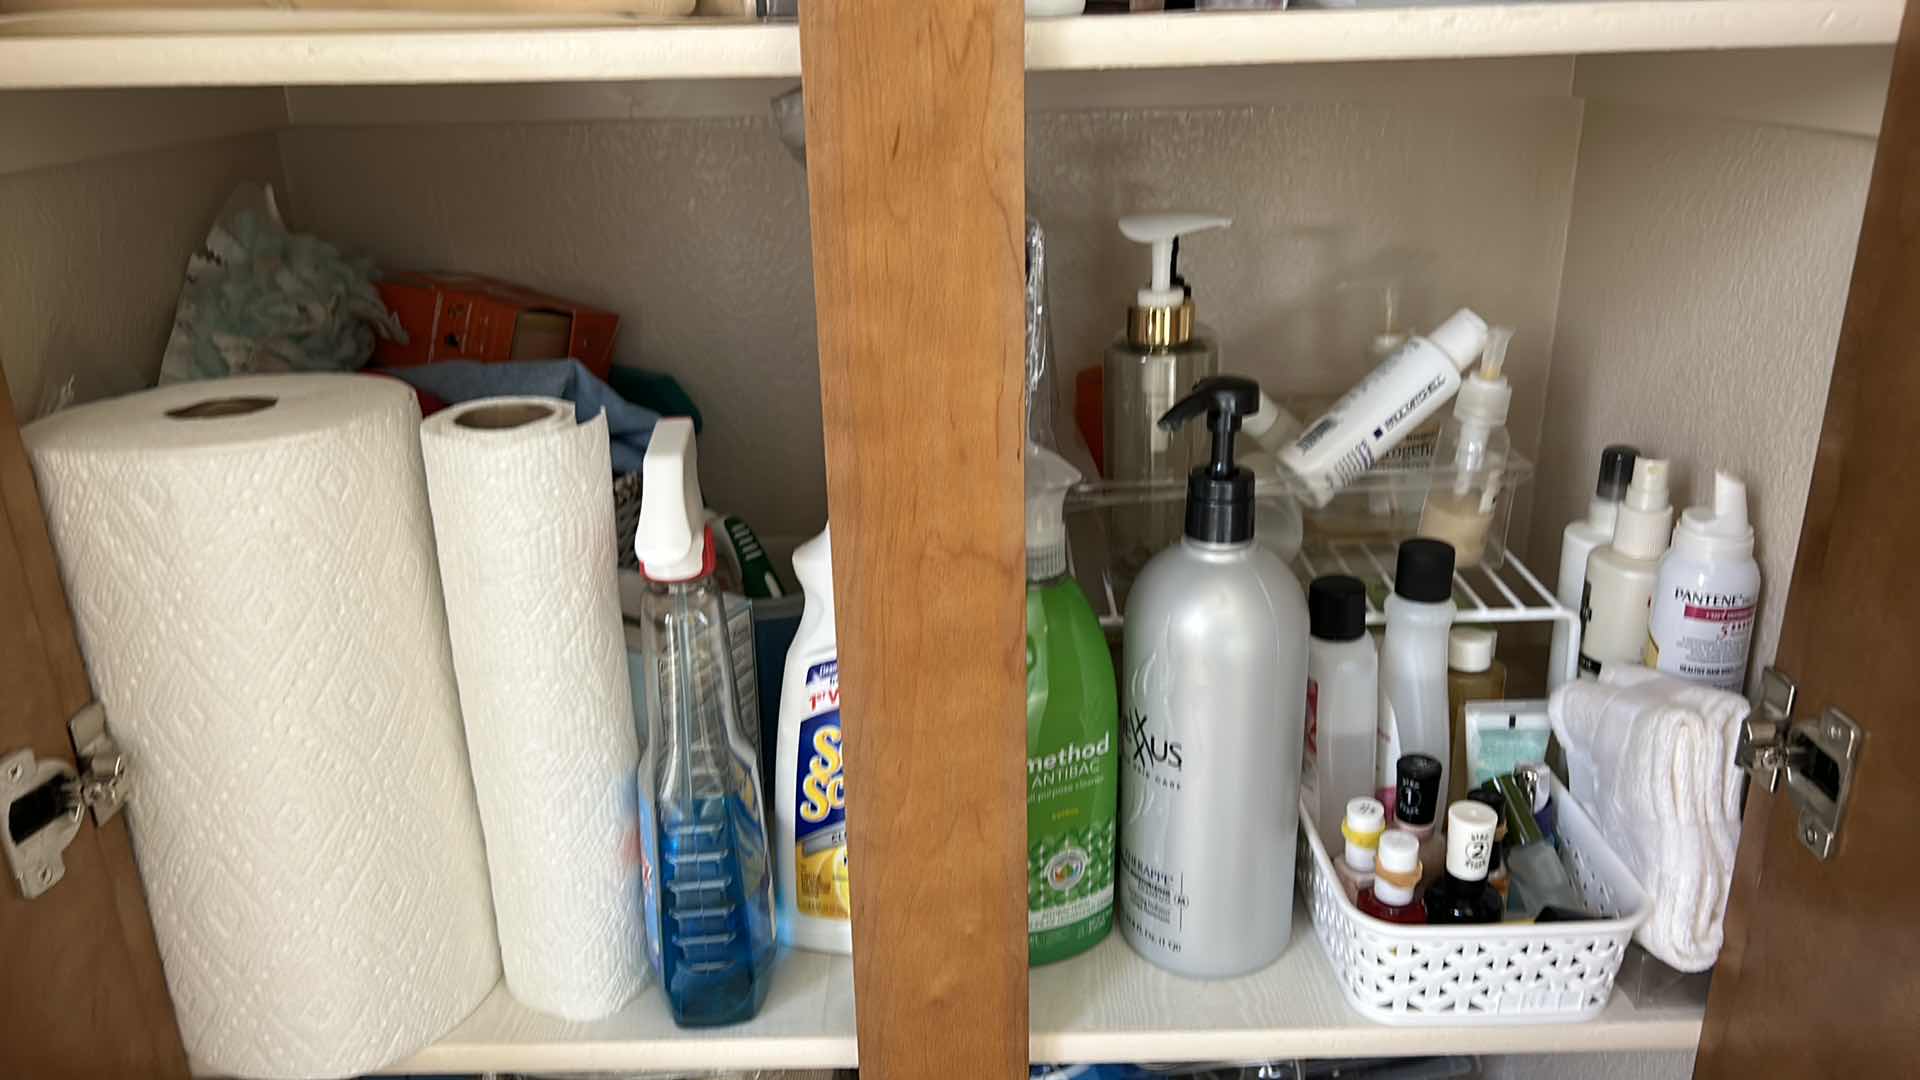 Photo 3 of Contents of bathroom cabinet